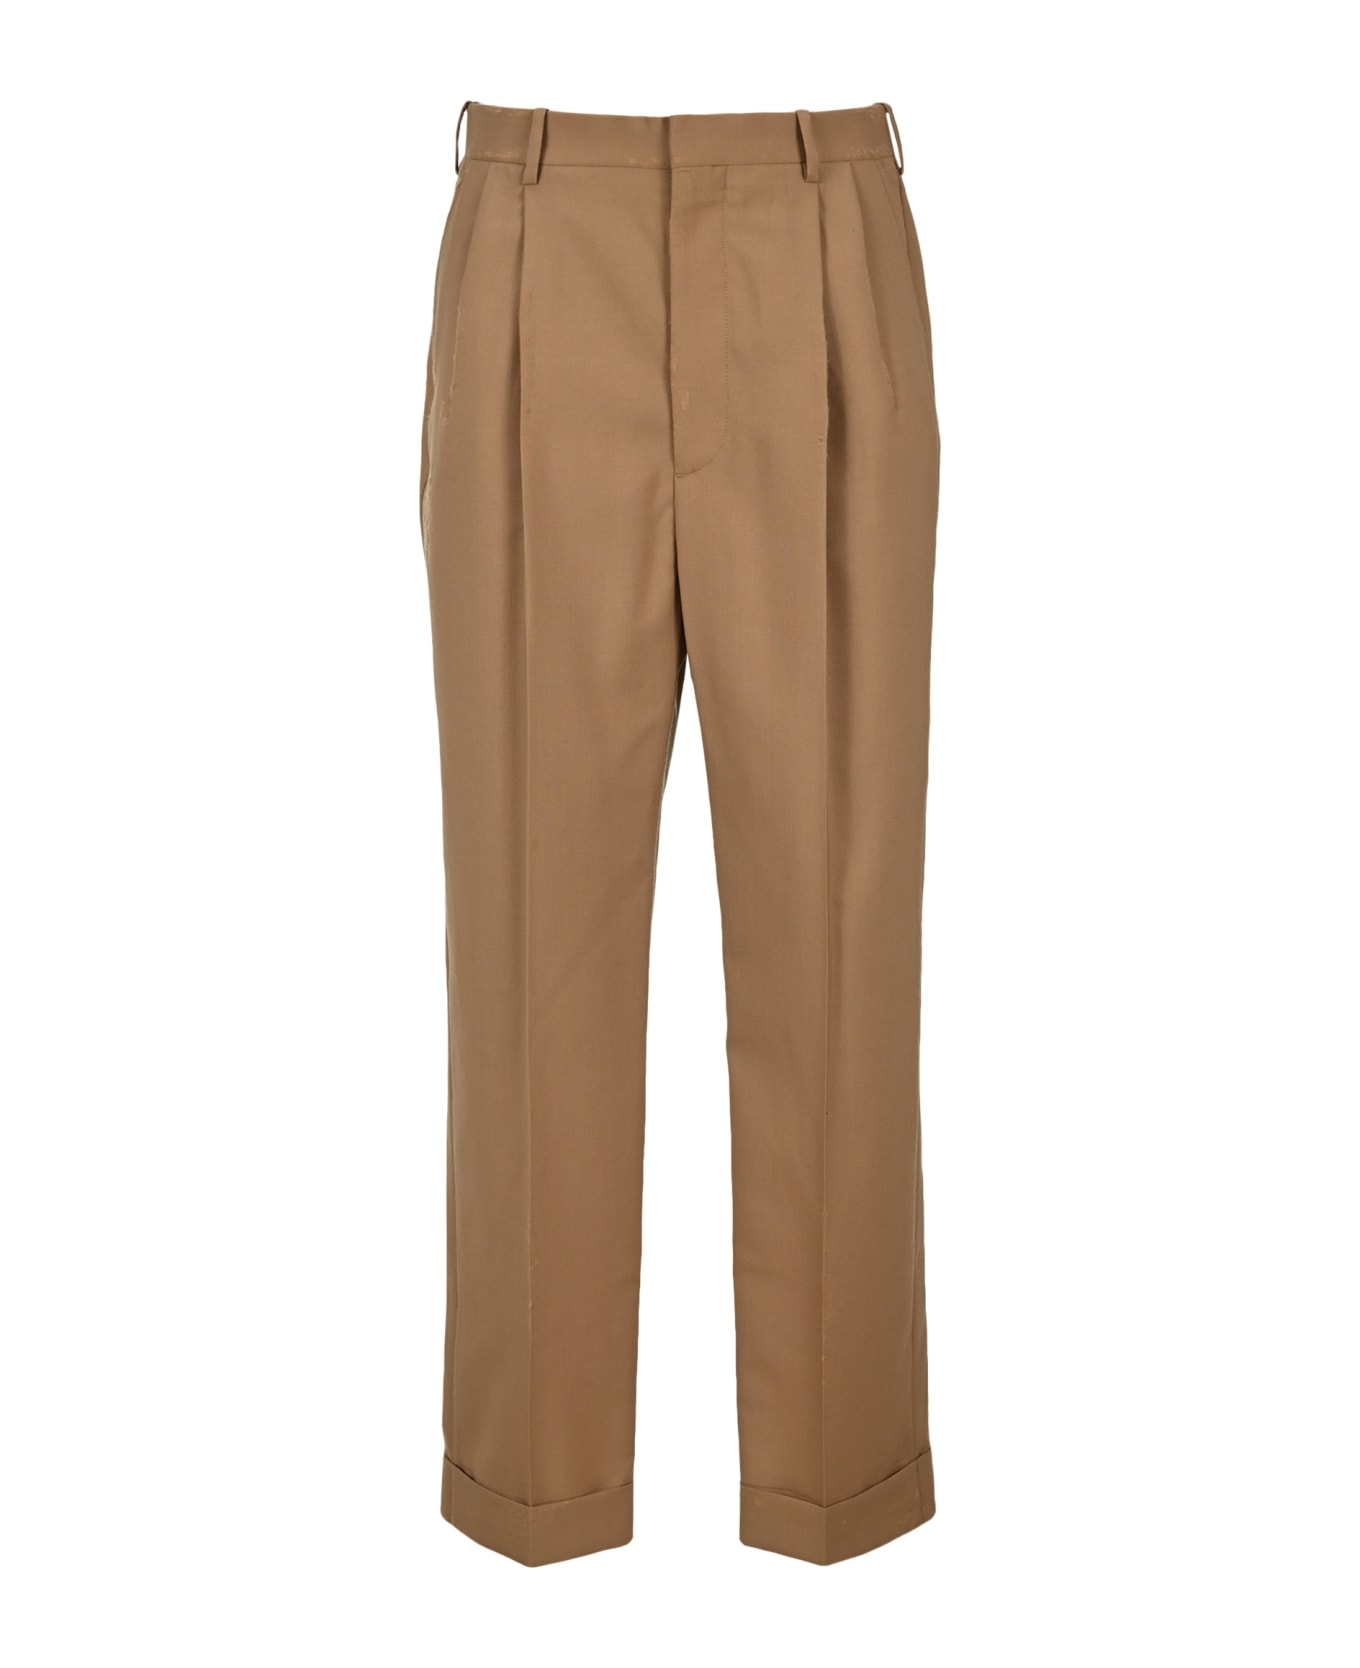 Marni Tailored Trousers - BEIGE ボトムス